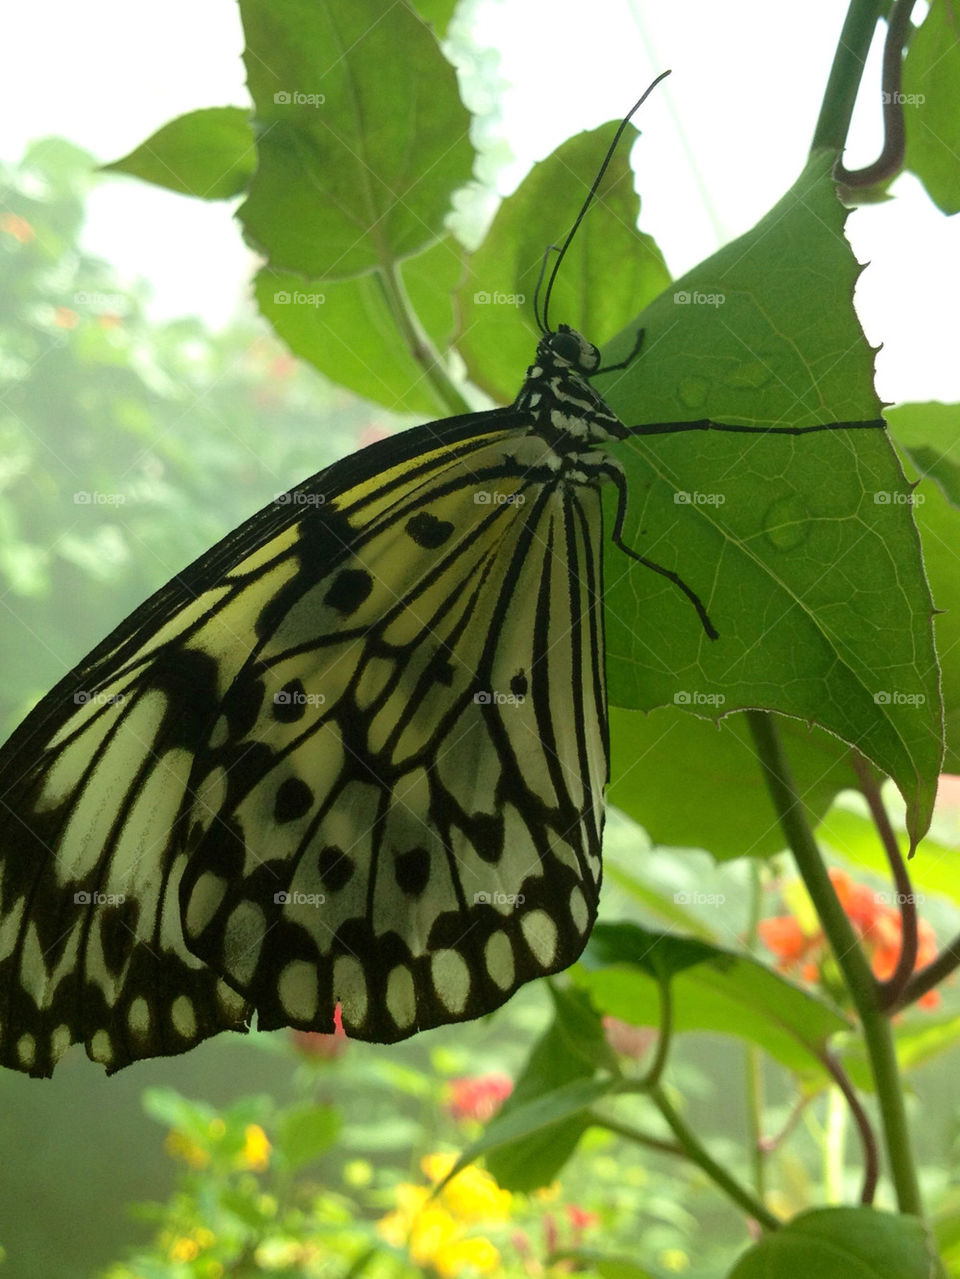 Butterfly house in Chesterfield, St Louis, Missouri at Faust Park